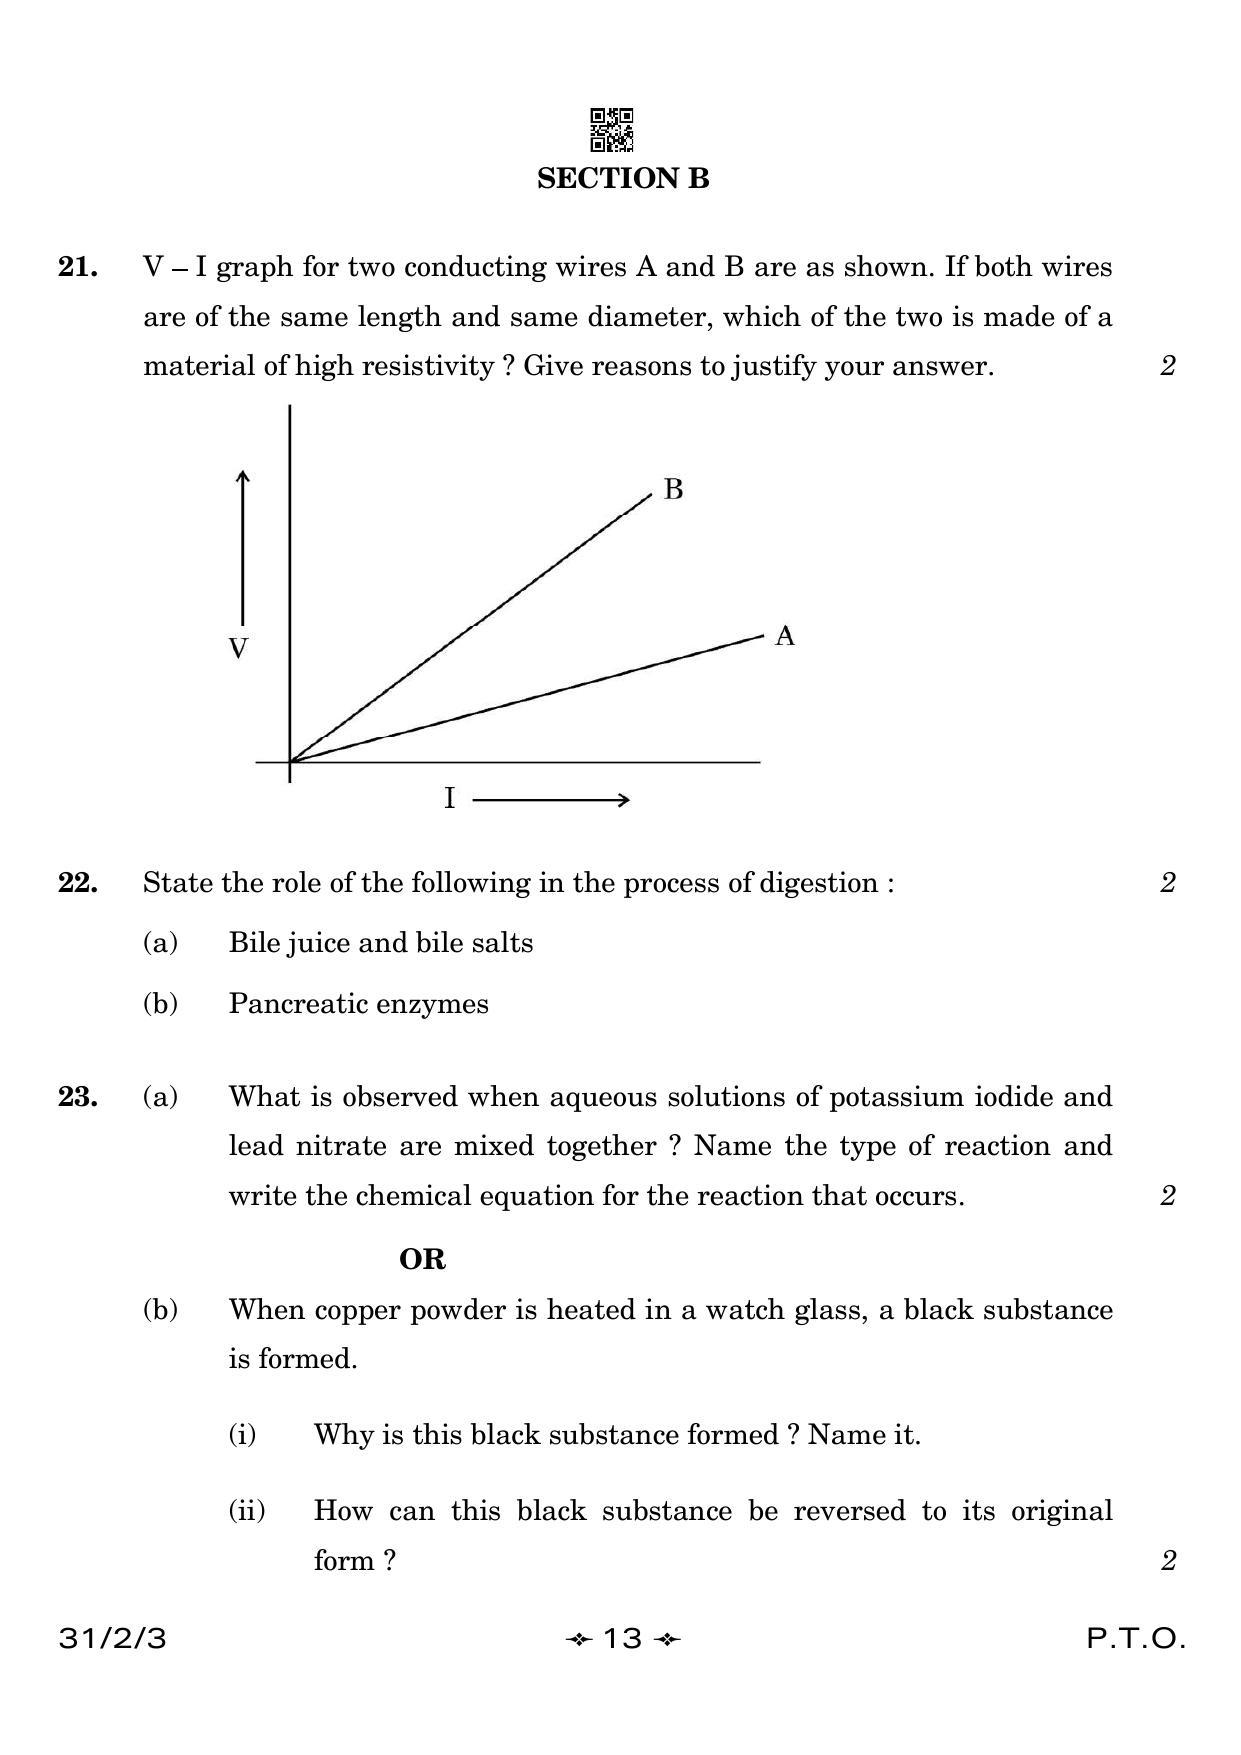 CBSE Class 10 31-2-3 Science 2023 Question Paper - Page 13